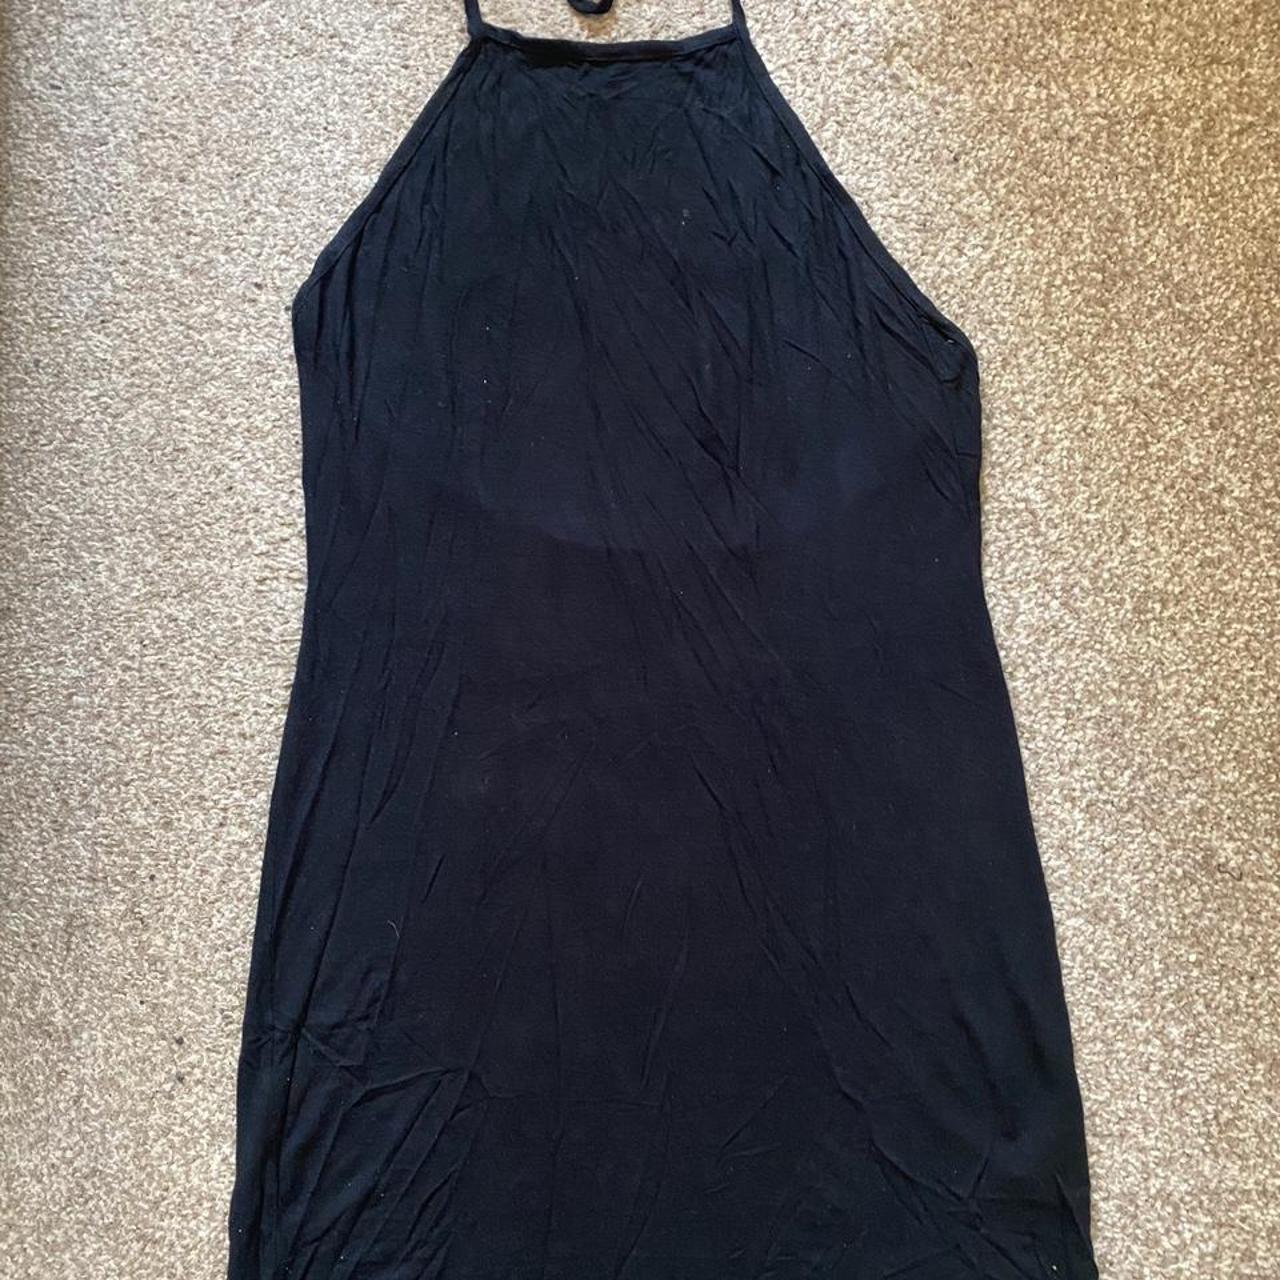 Ski suit - Missguided ski suit, very warm and - Depop